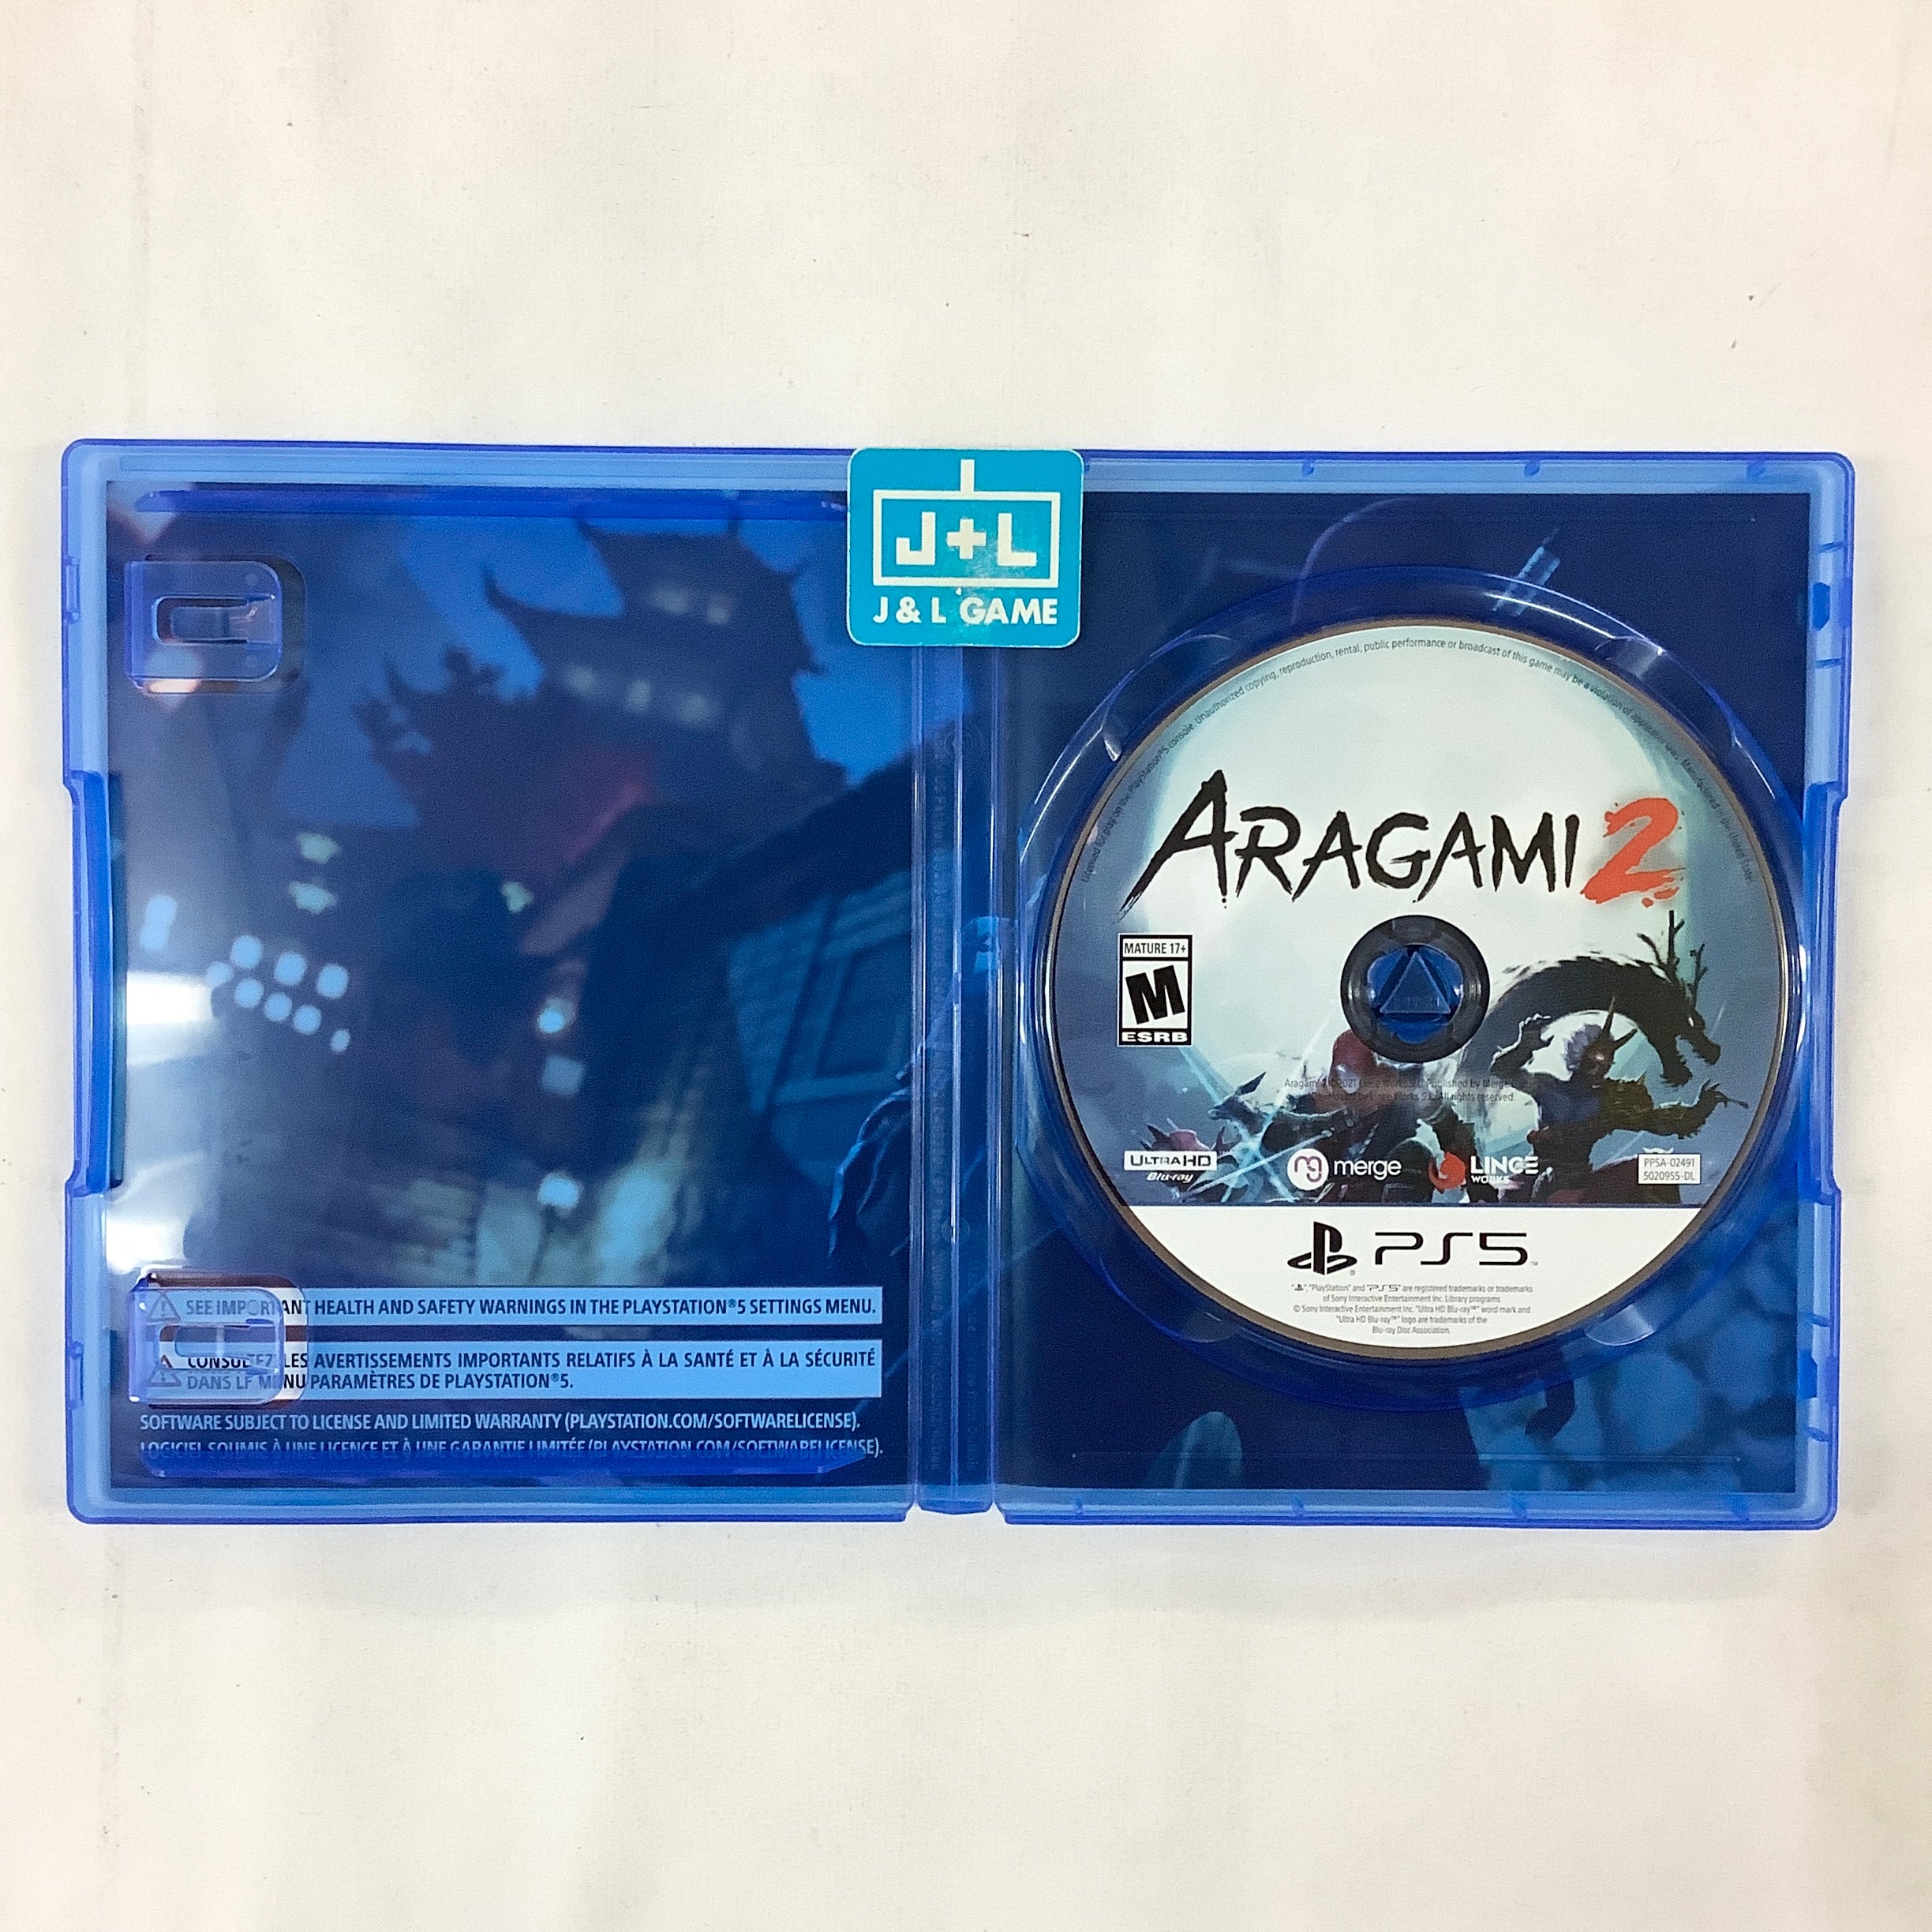 Aragami 2 - (PS5) PlayStation 5 [UNBOXING] Video Games Merge Games   